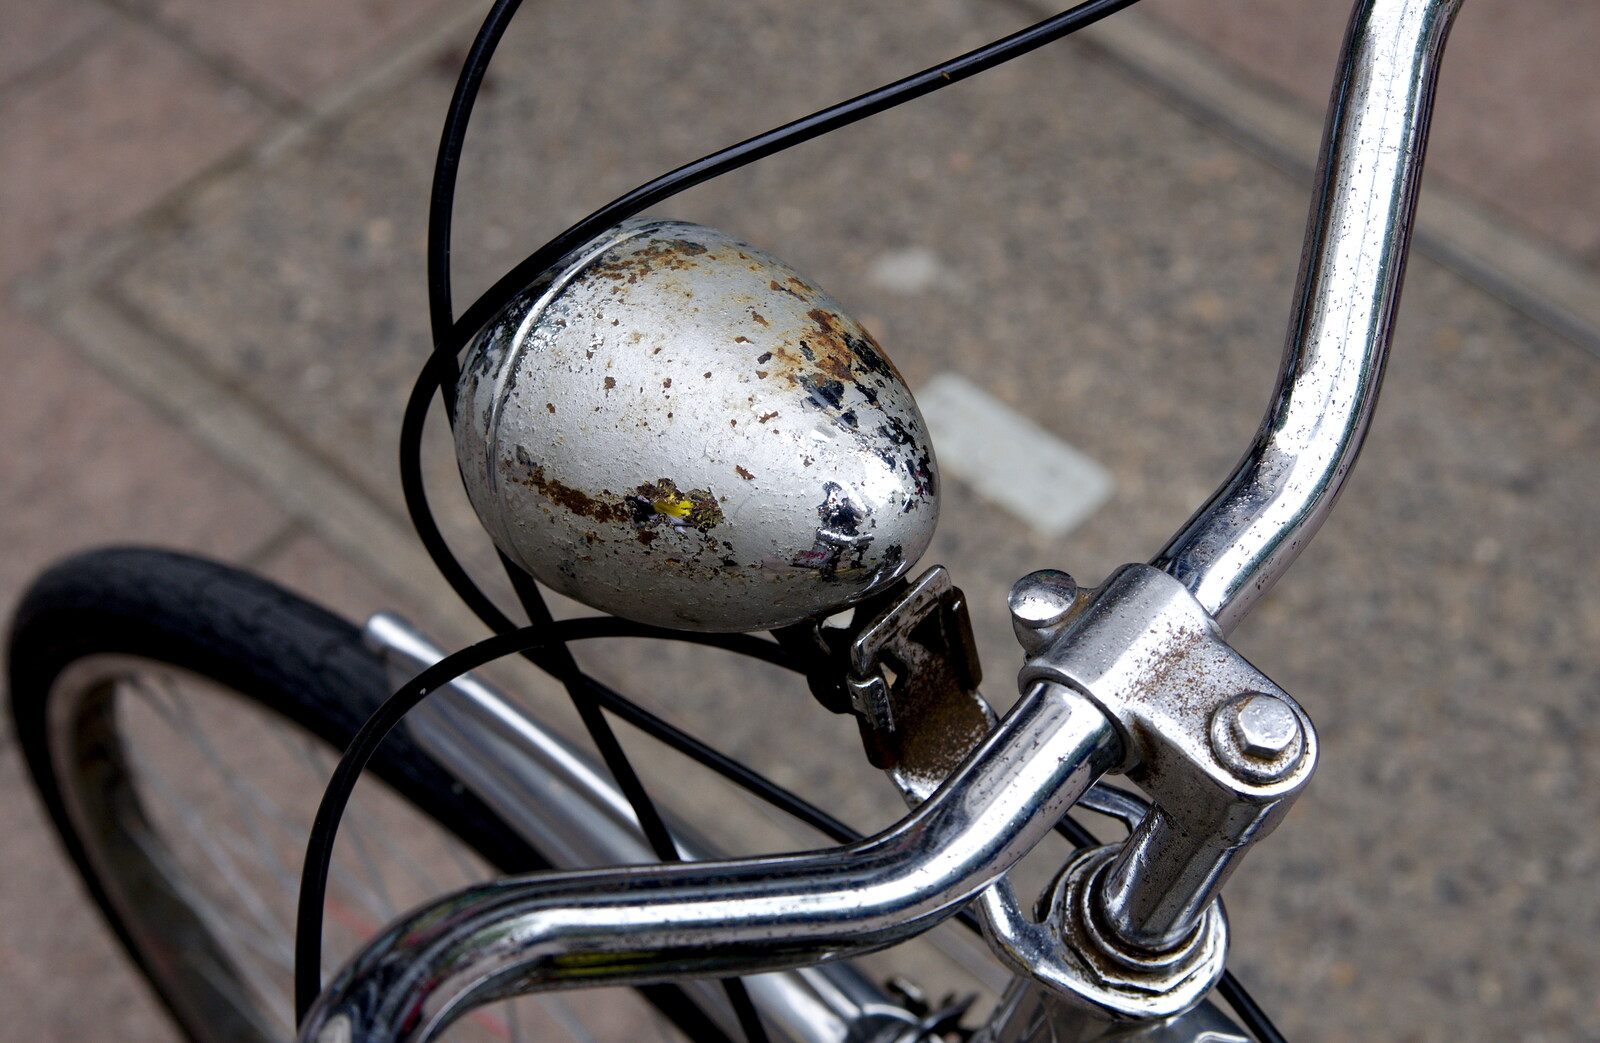 A bicycle headlight, with flaking chrome from Sis and Matt Visit, Suffolk and Norfolk - 31st May 2014